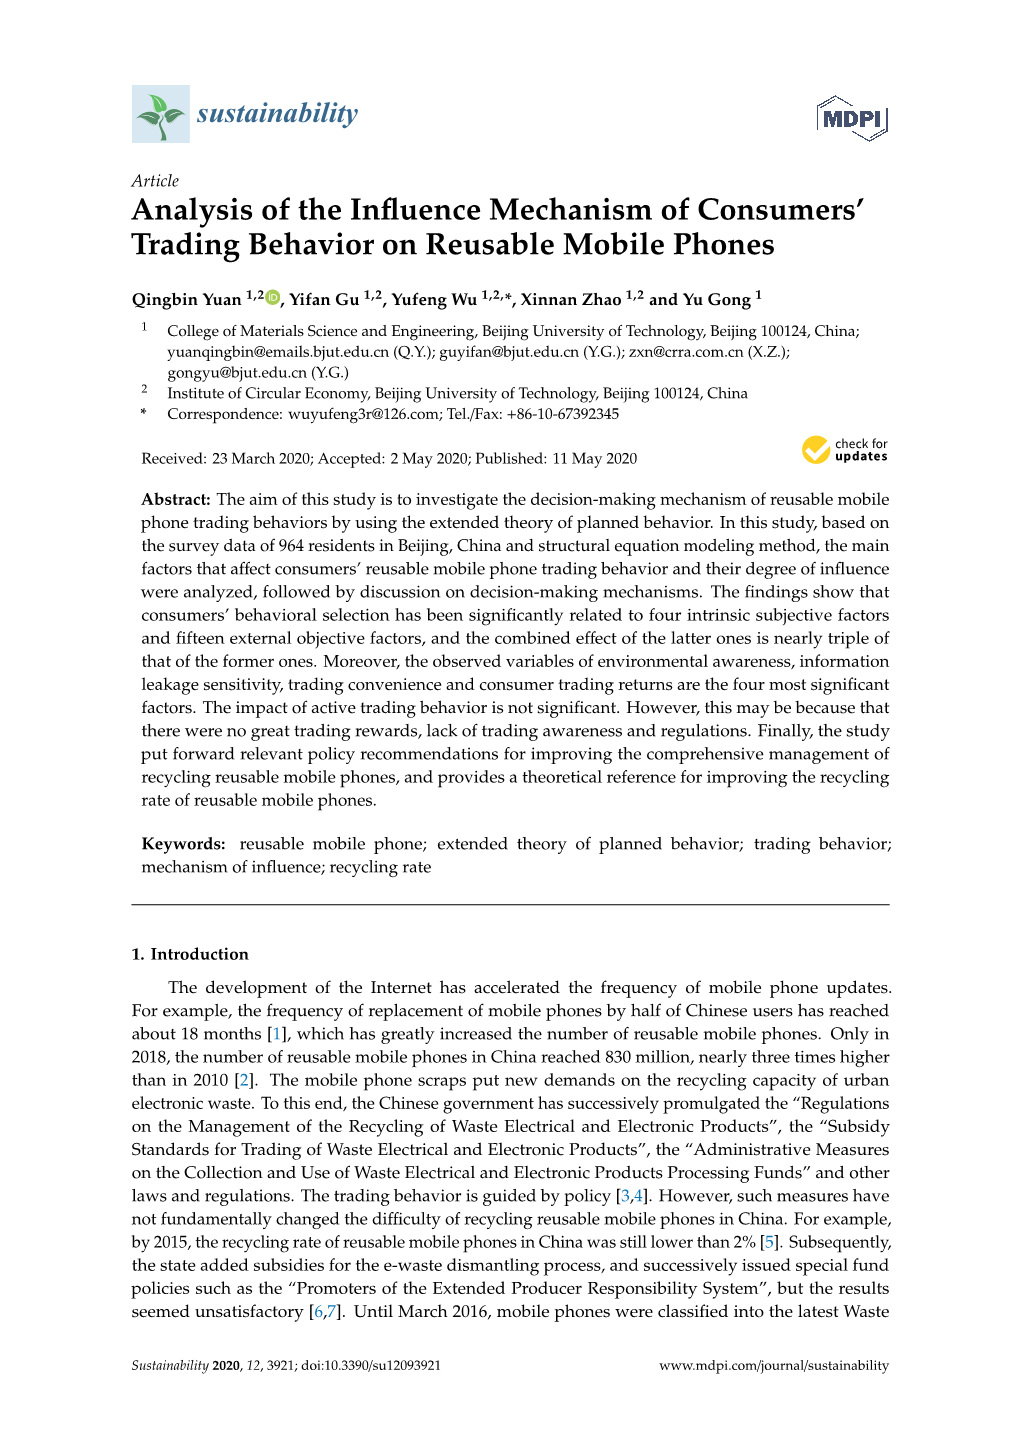 Analysis of the Influence Mechanism of Consumers' Trading Behavior On